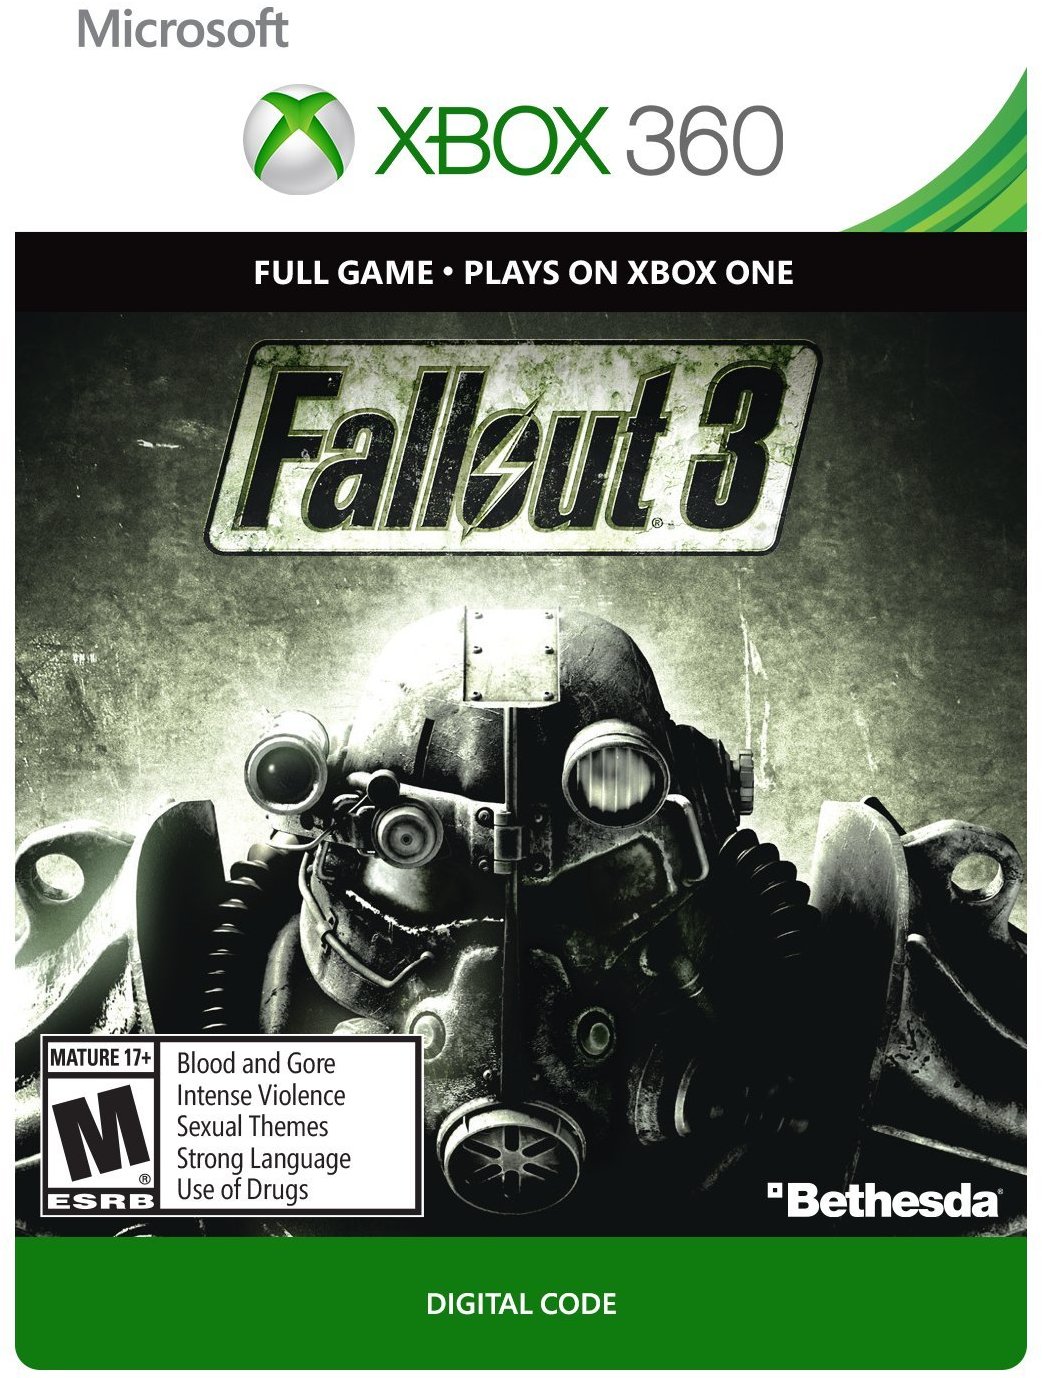 fallout new vegas ultimate edition xbox one digital